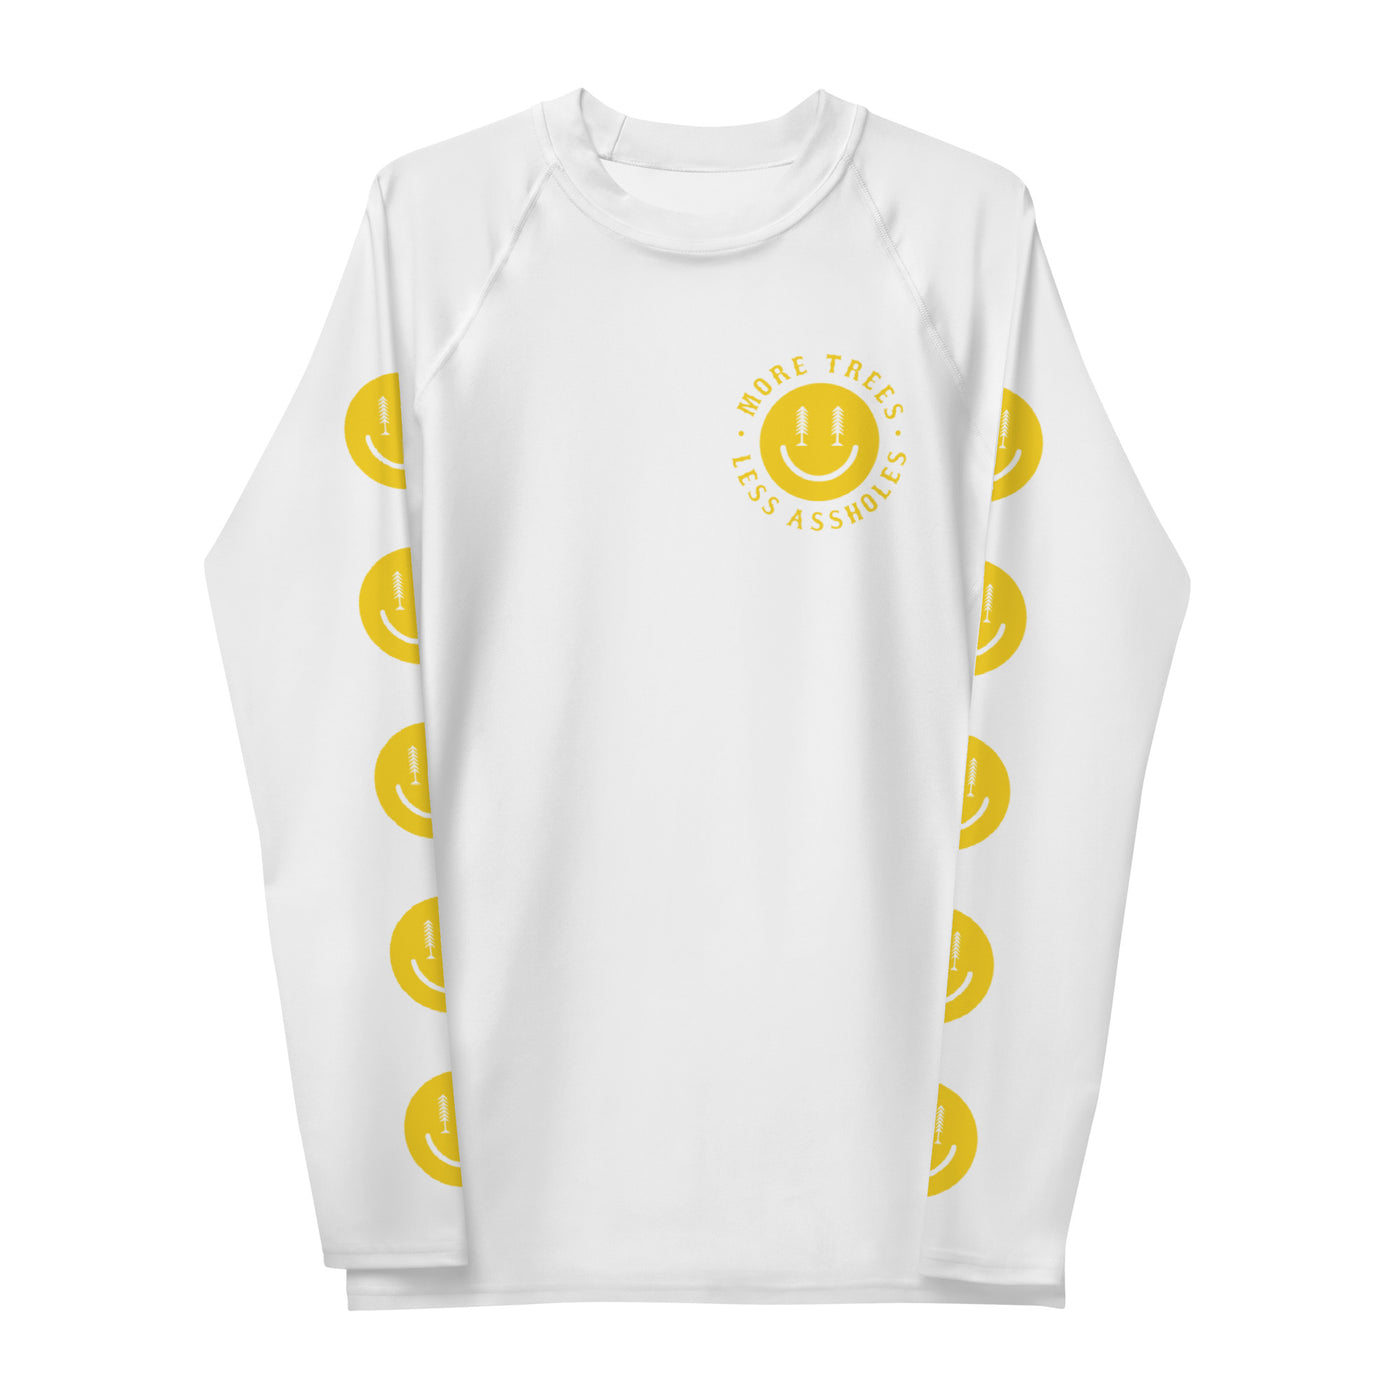 Lords x More Trees Wind Guard Jersey - White/Yellow